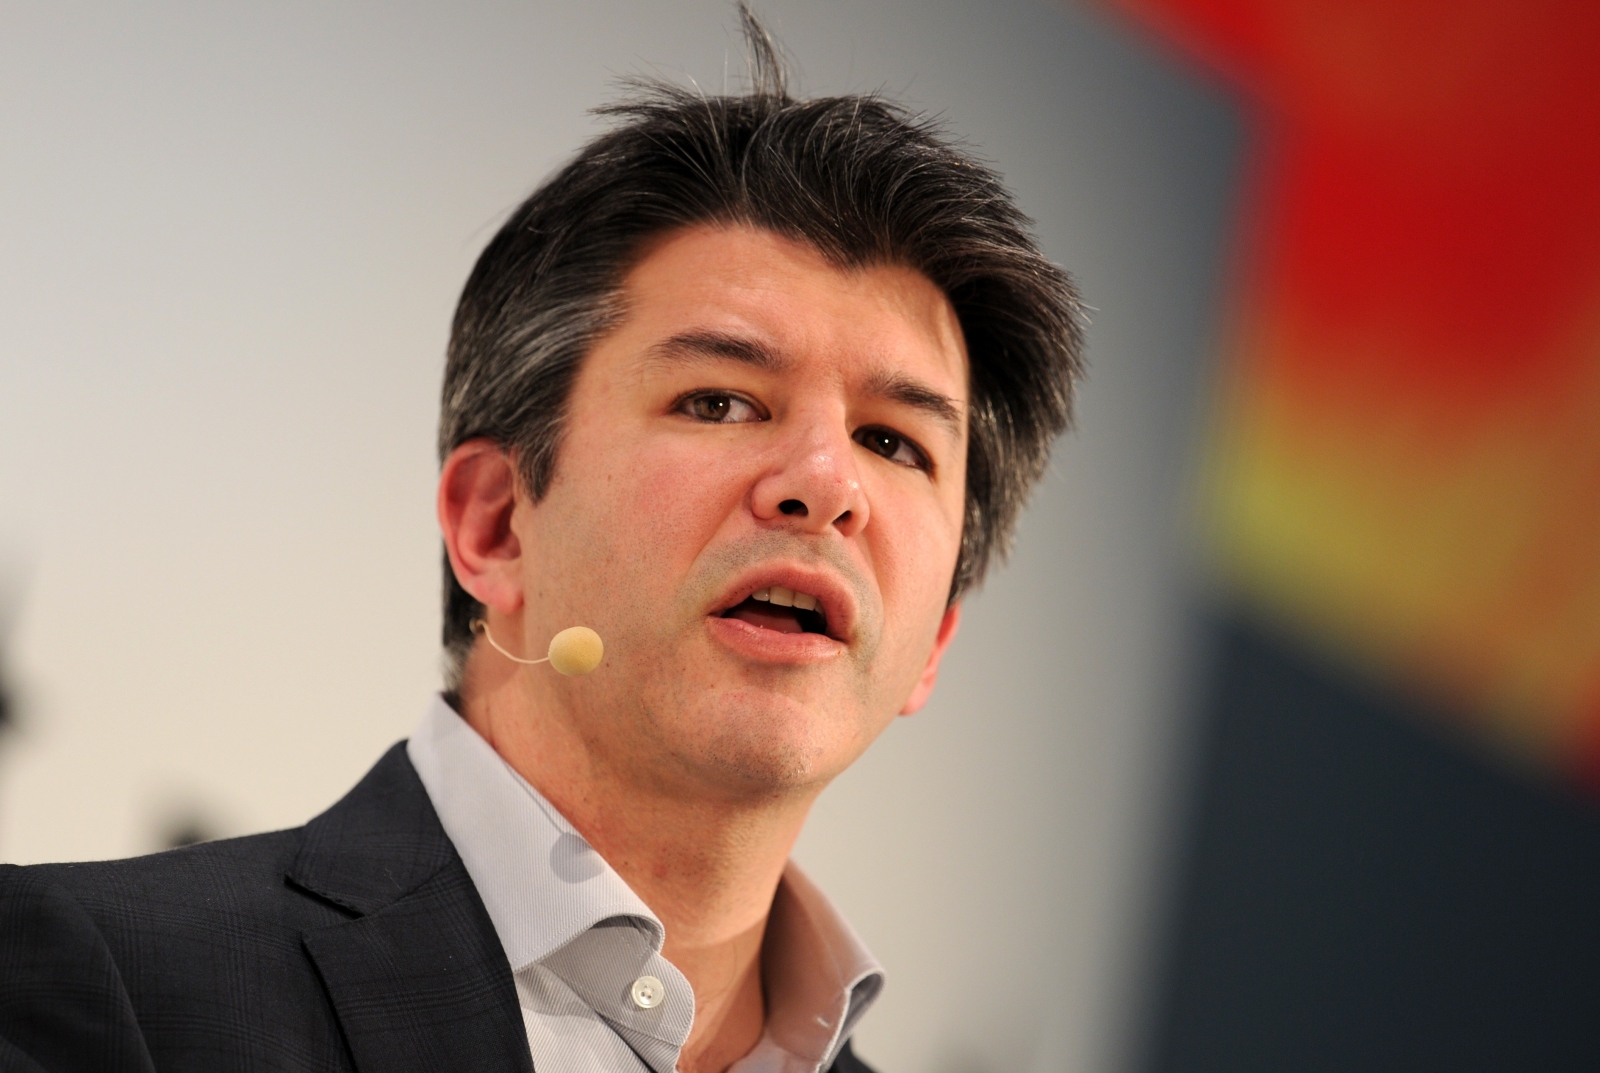 UBER CEO TRAVIS KALANICK FORCED OUT.